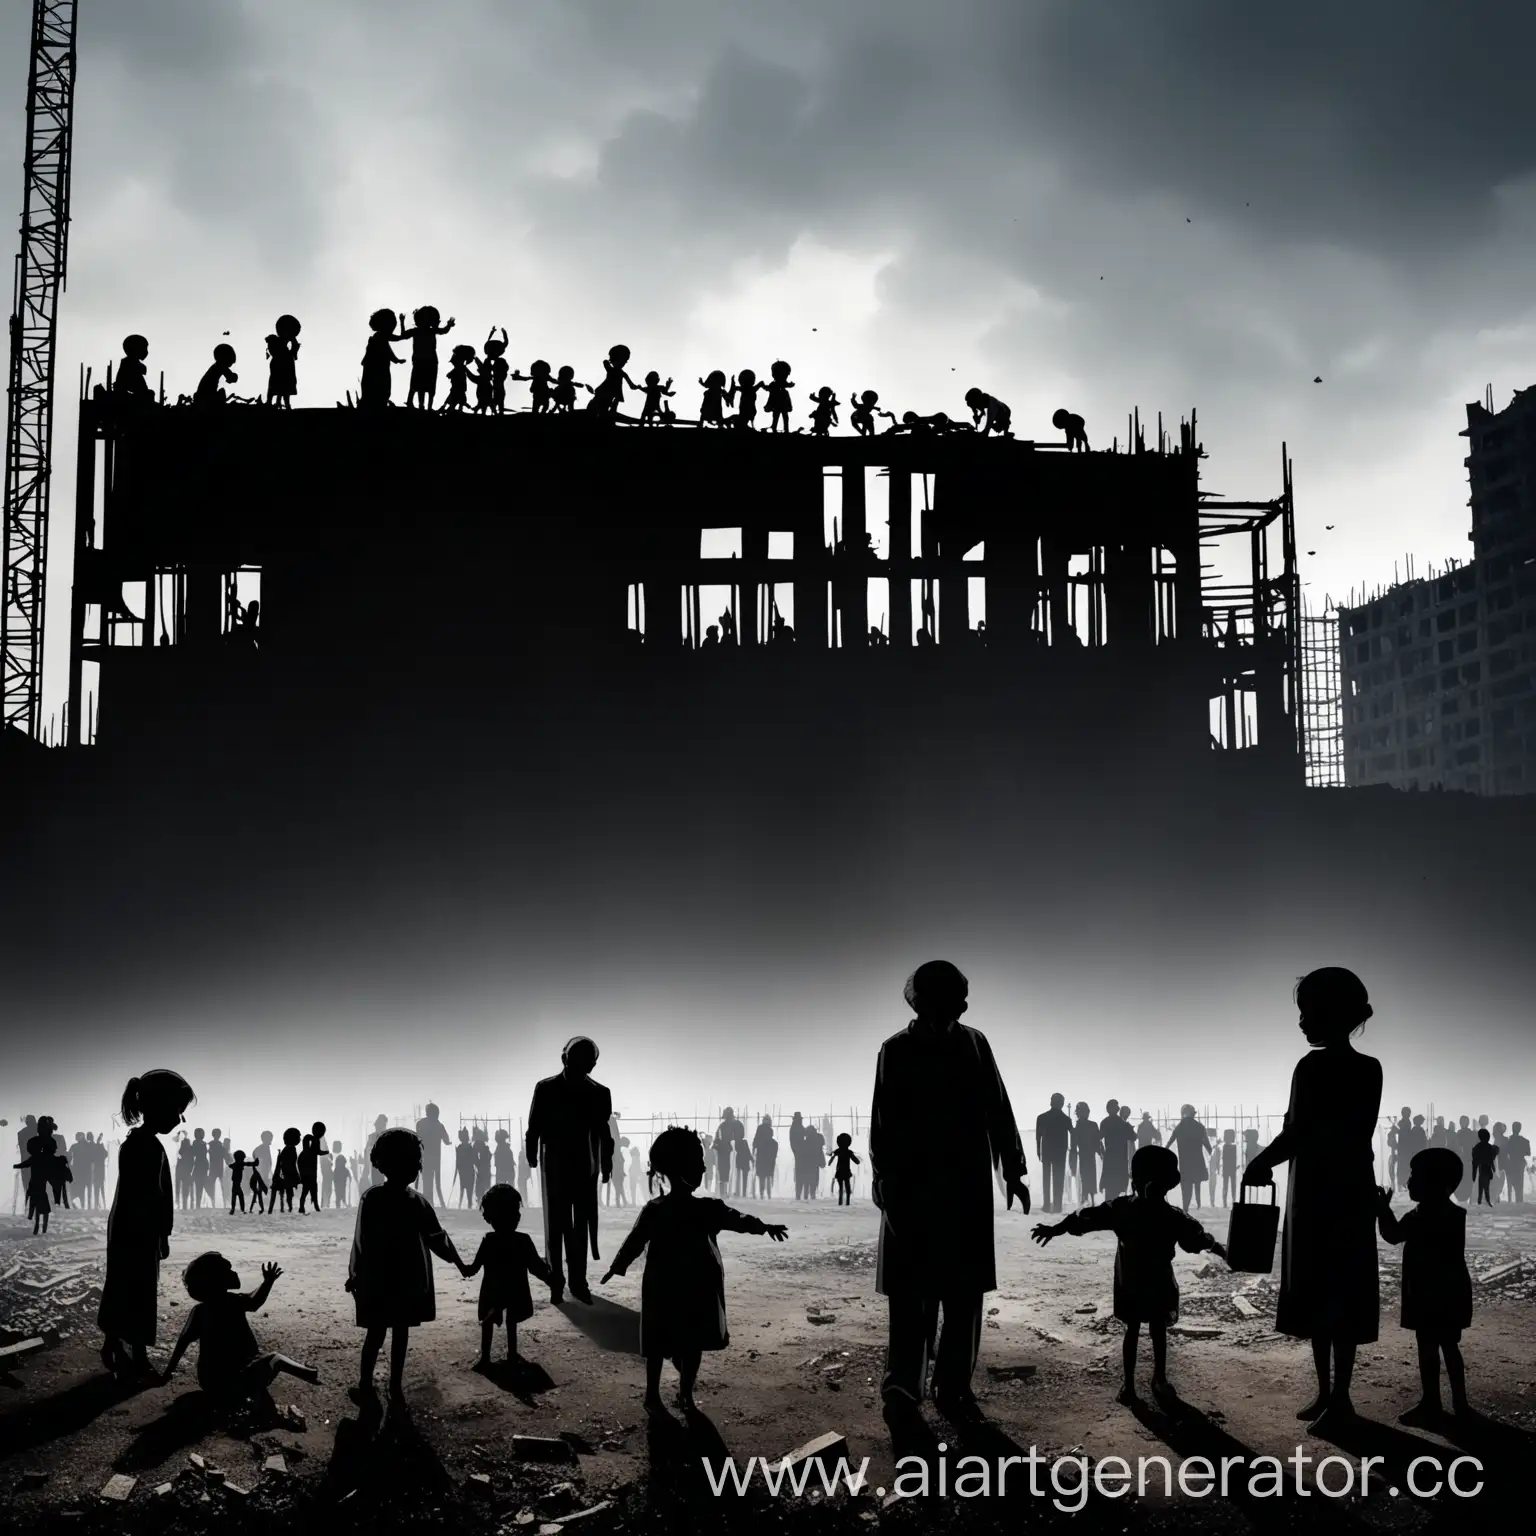 Silhouettes-of-People-at-Abandoned-Construction-Site-with-Crying-Children-and-Bureaucrats